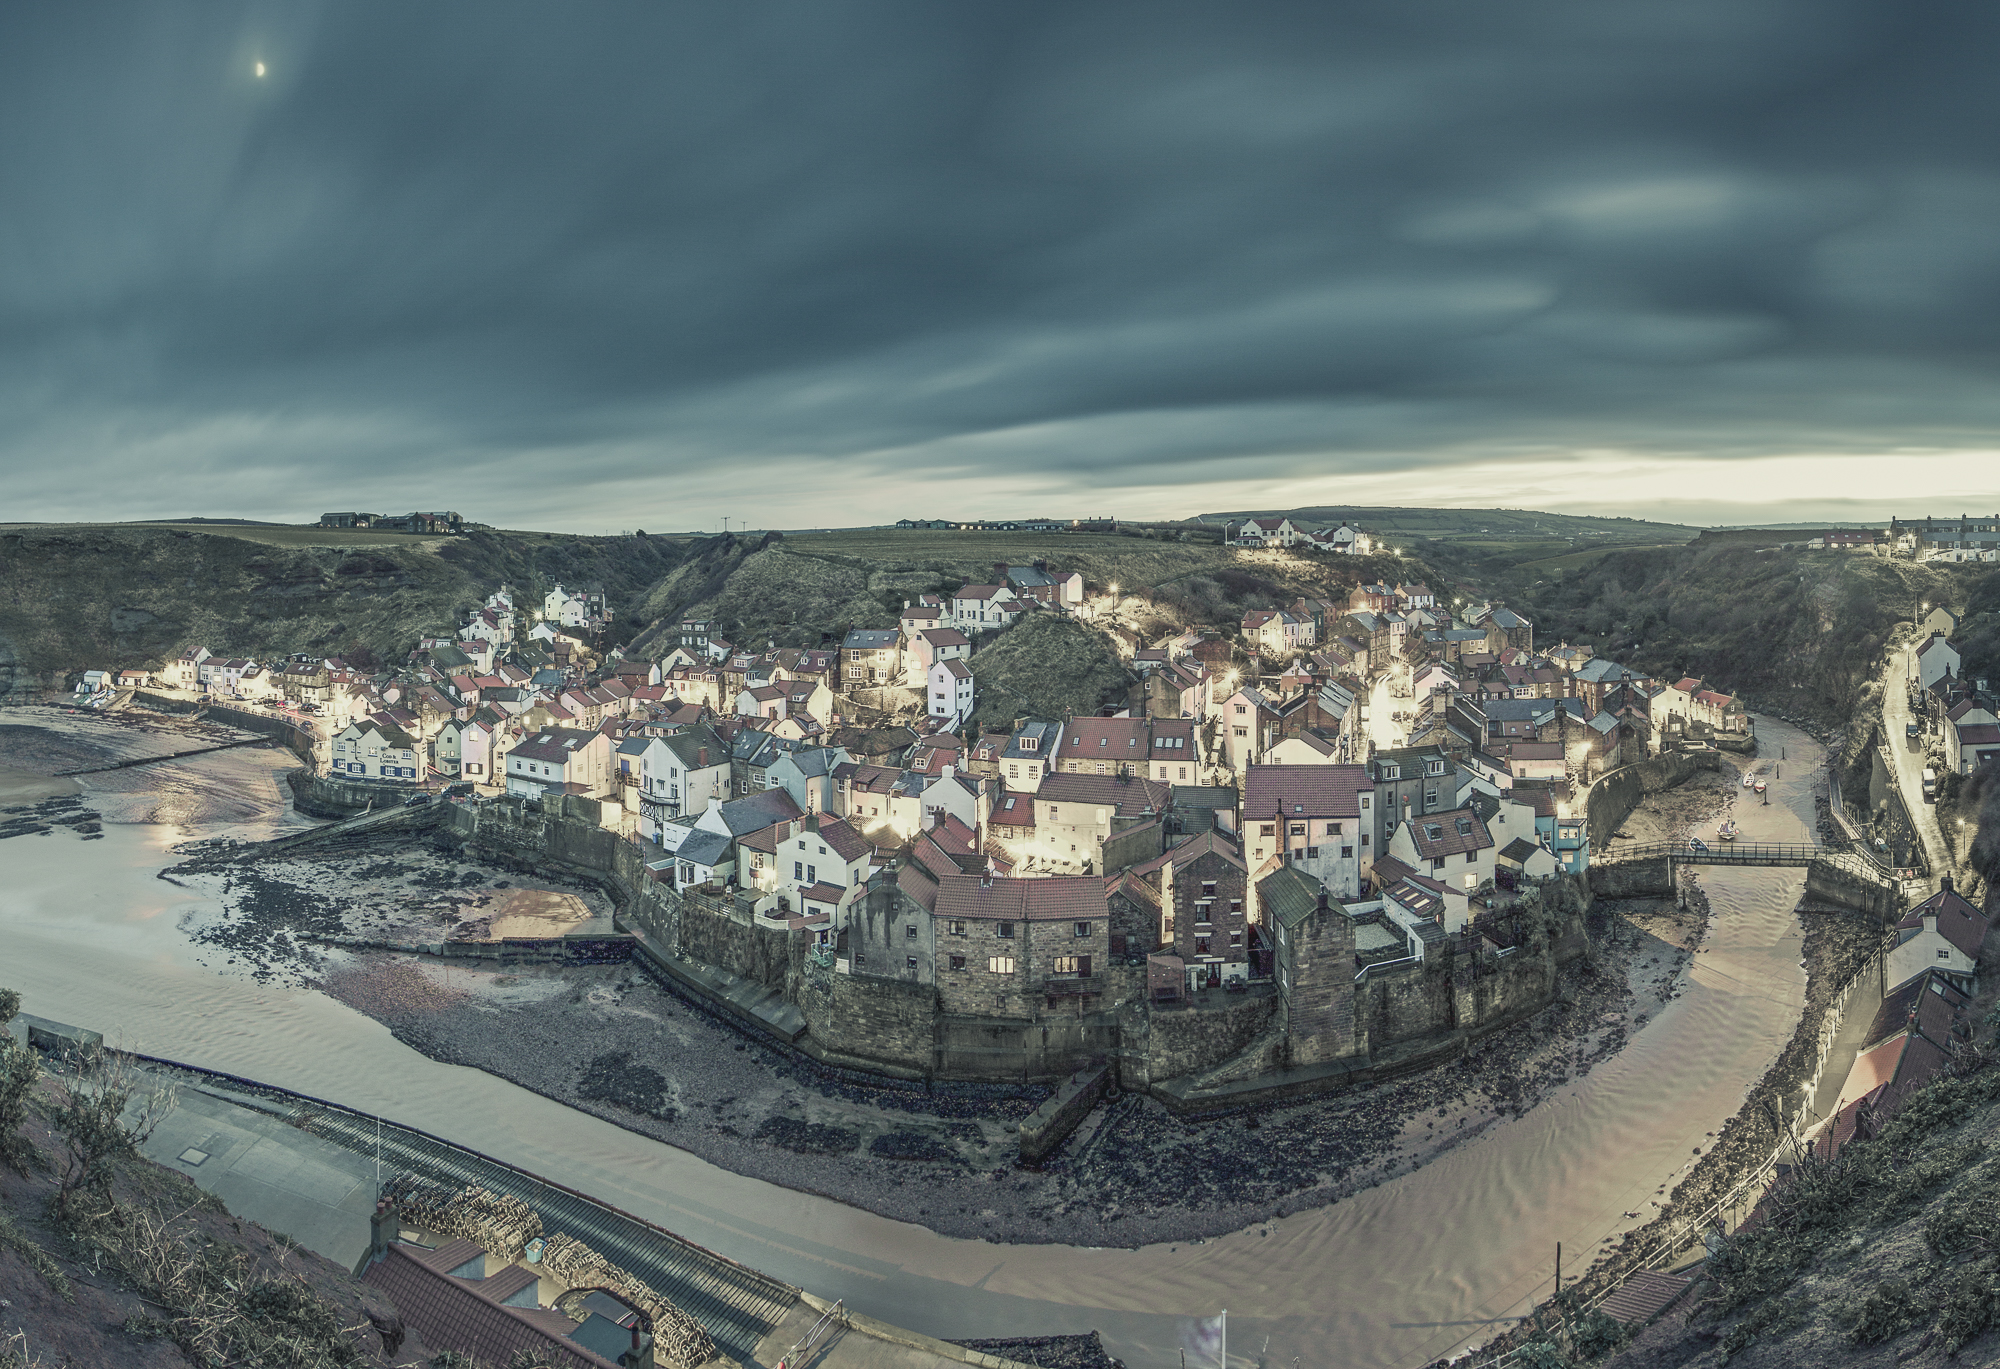 Photograph of Staithes